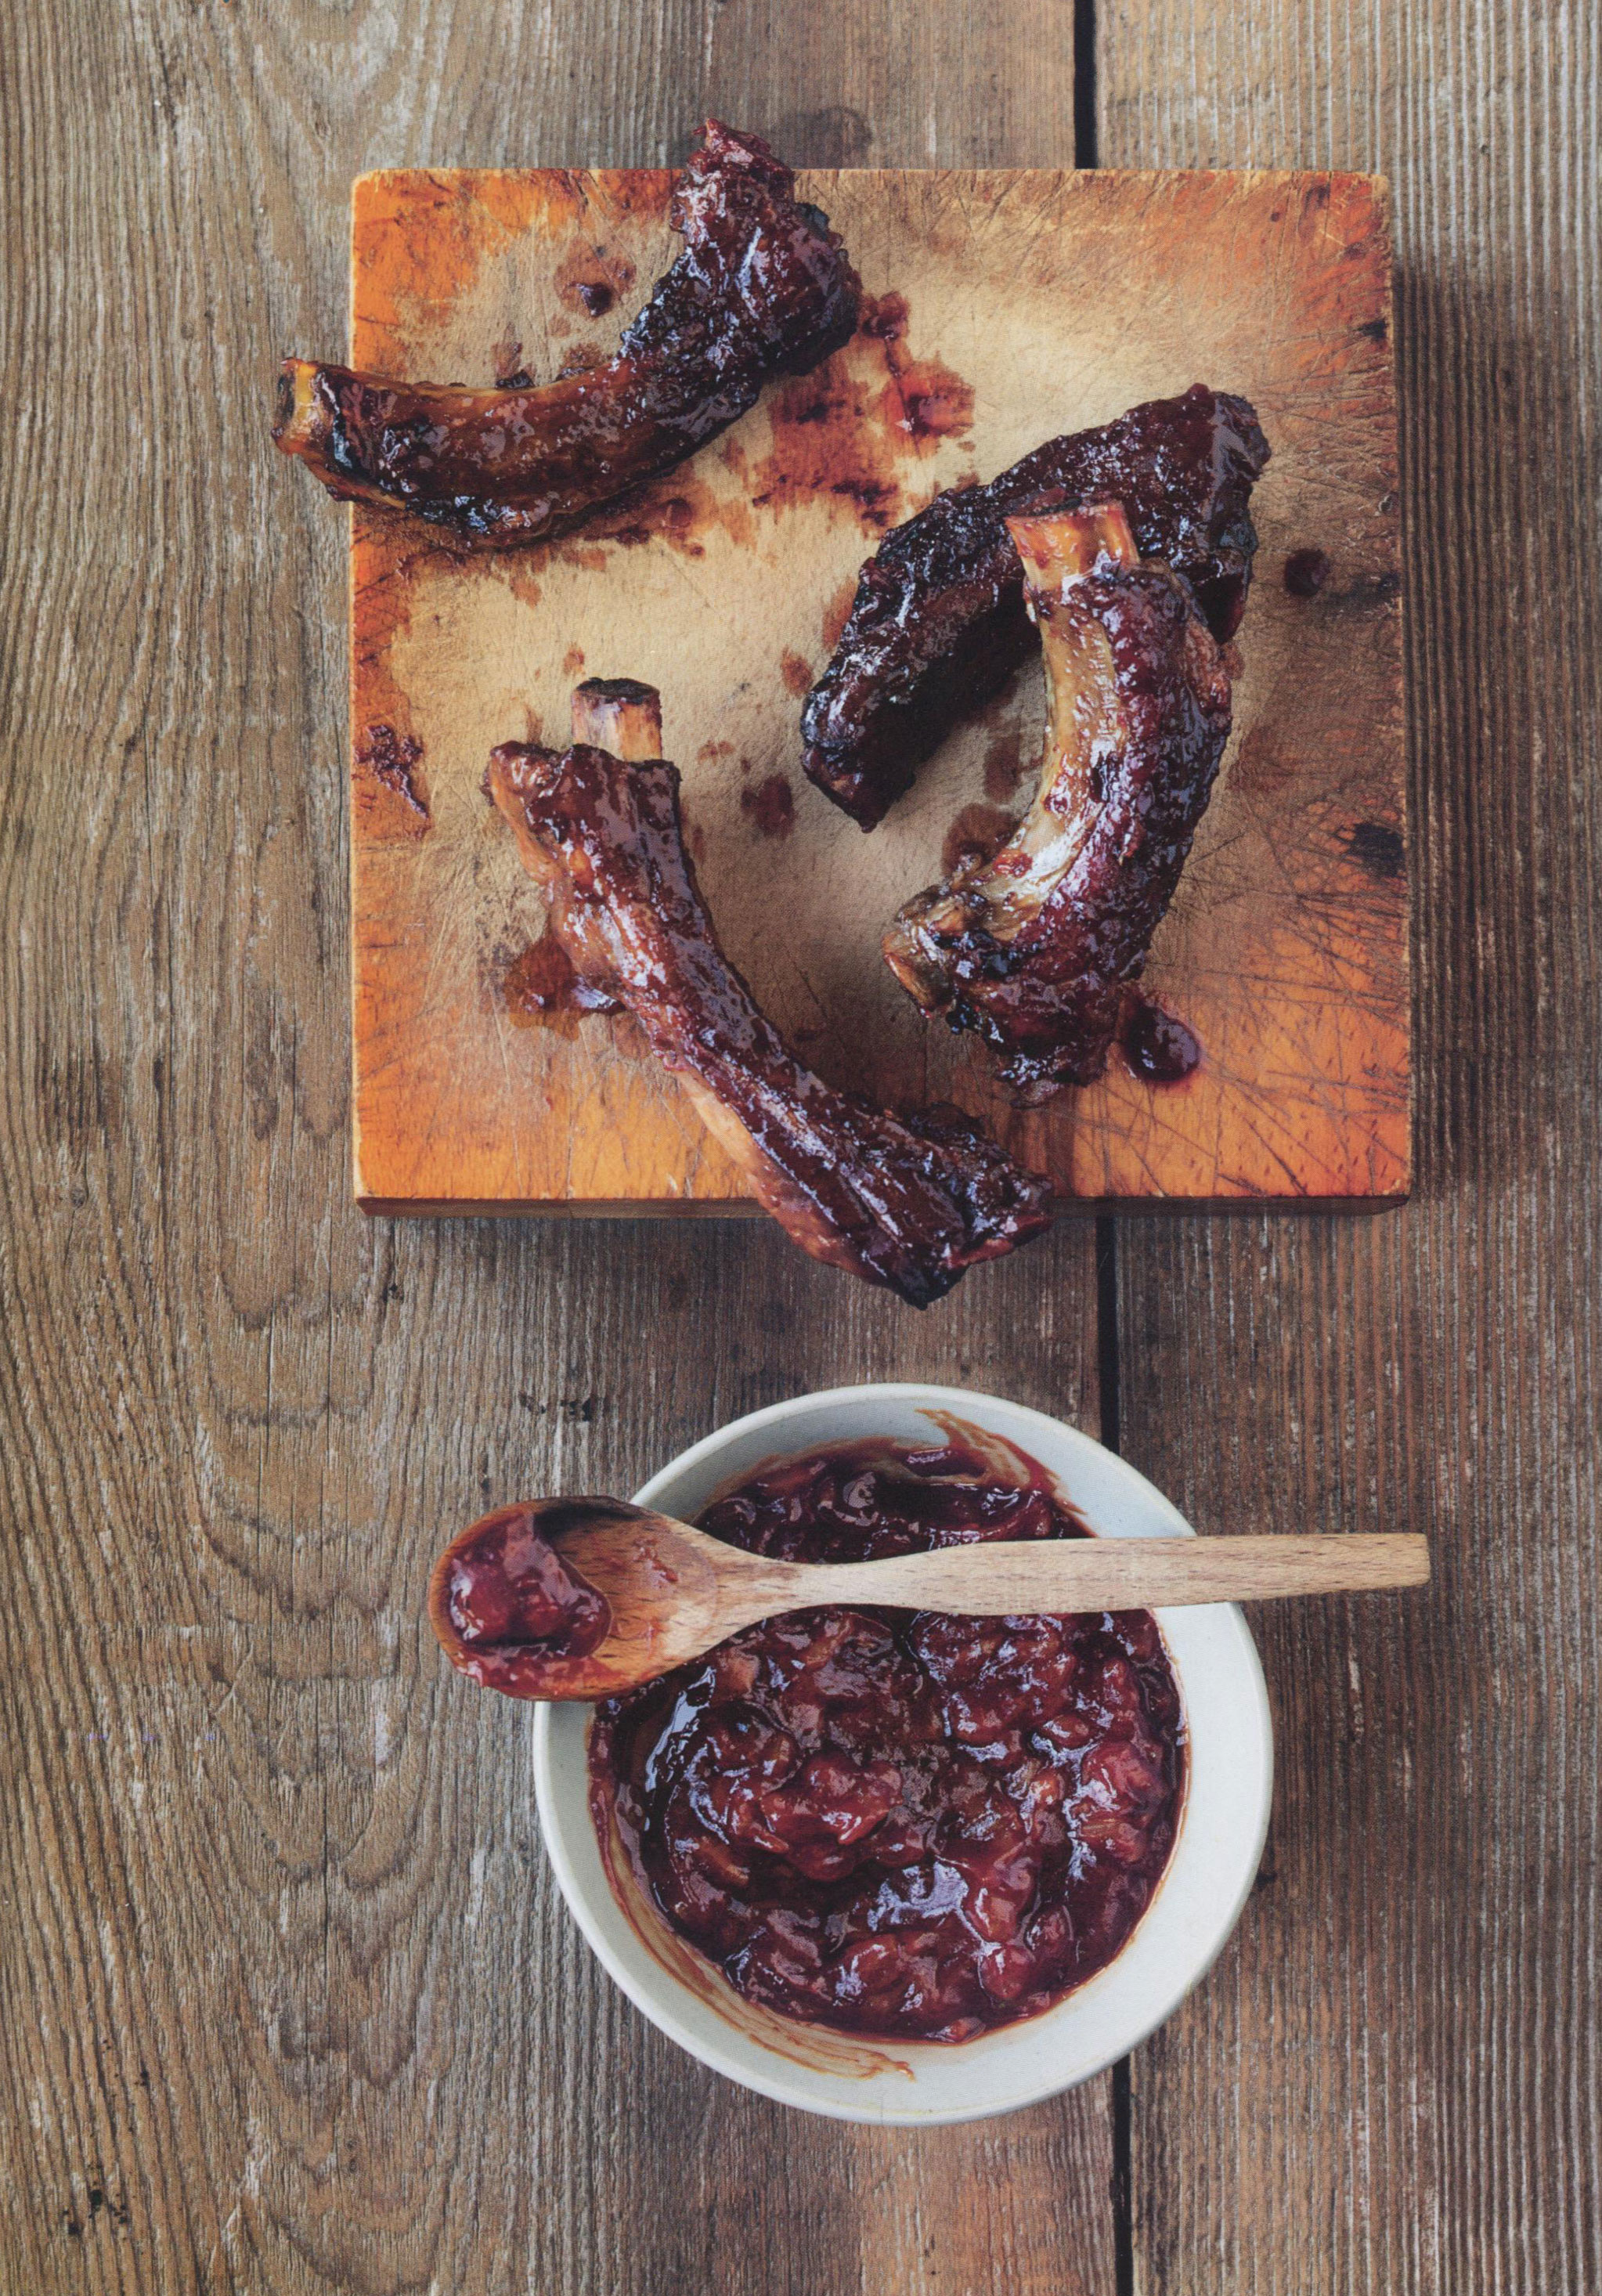 TBT Recipe: Barbecue-Style Baby Back Ribs